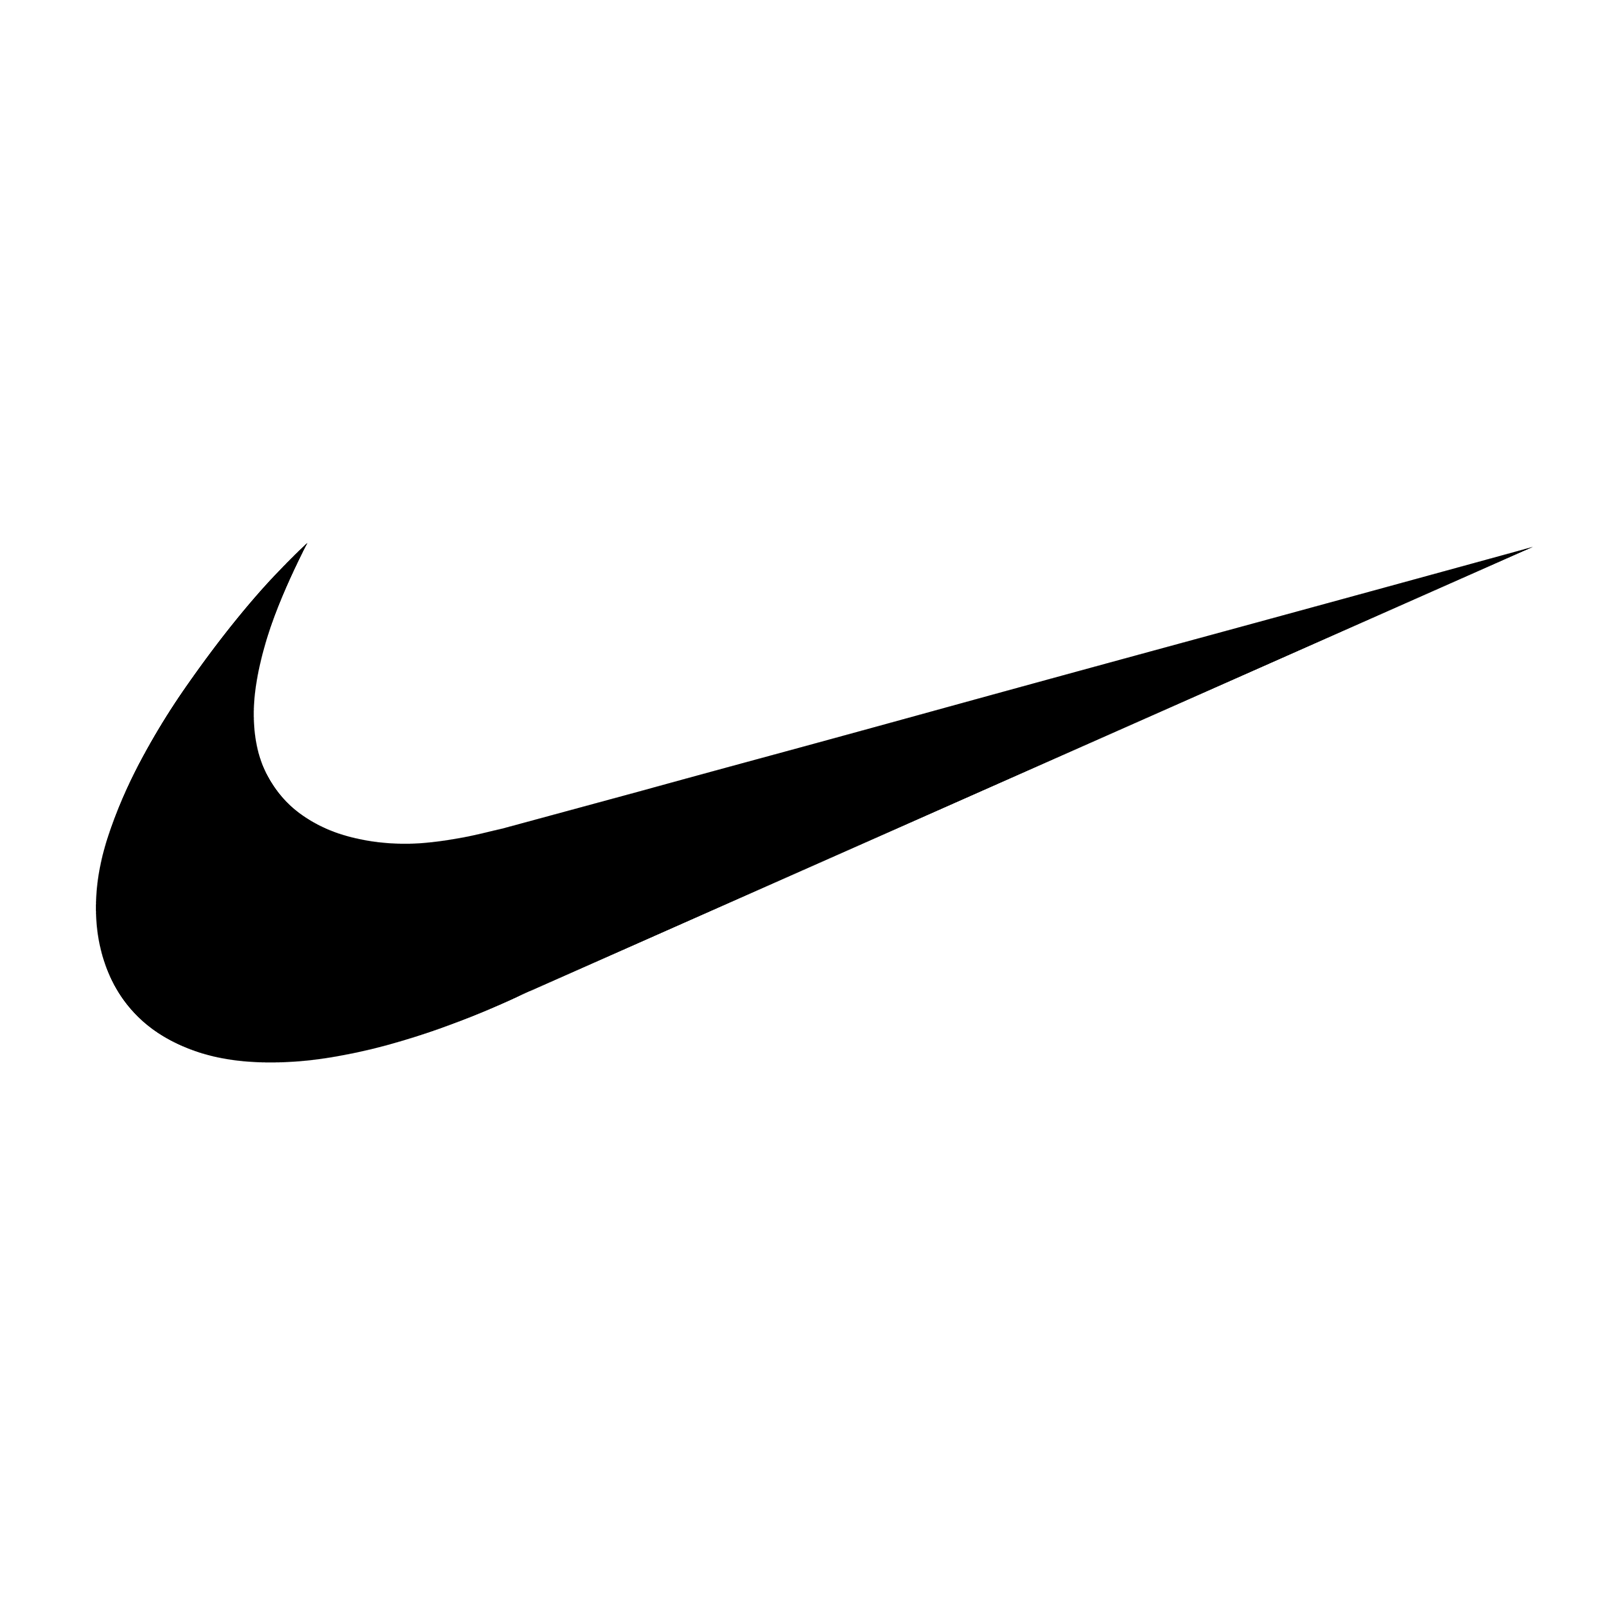 recruitment code for nike product testing